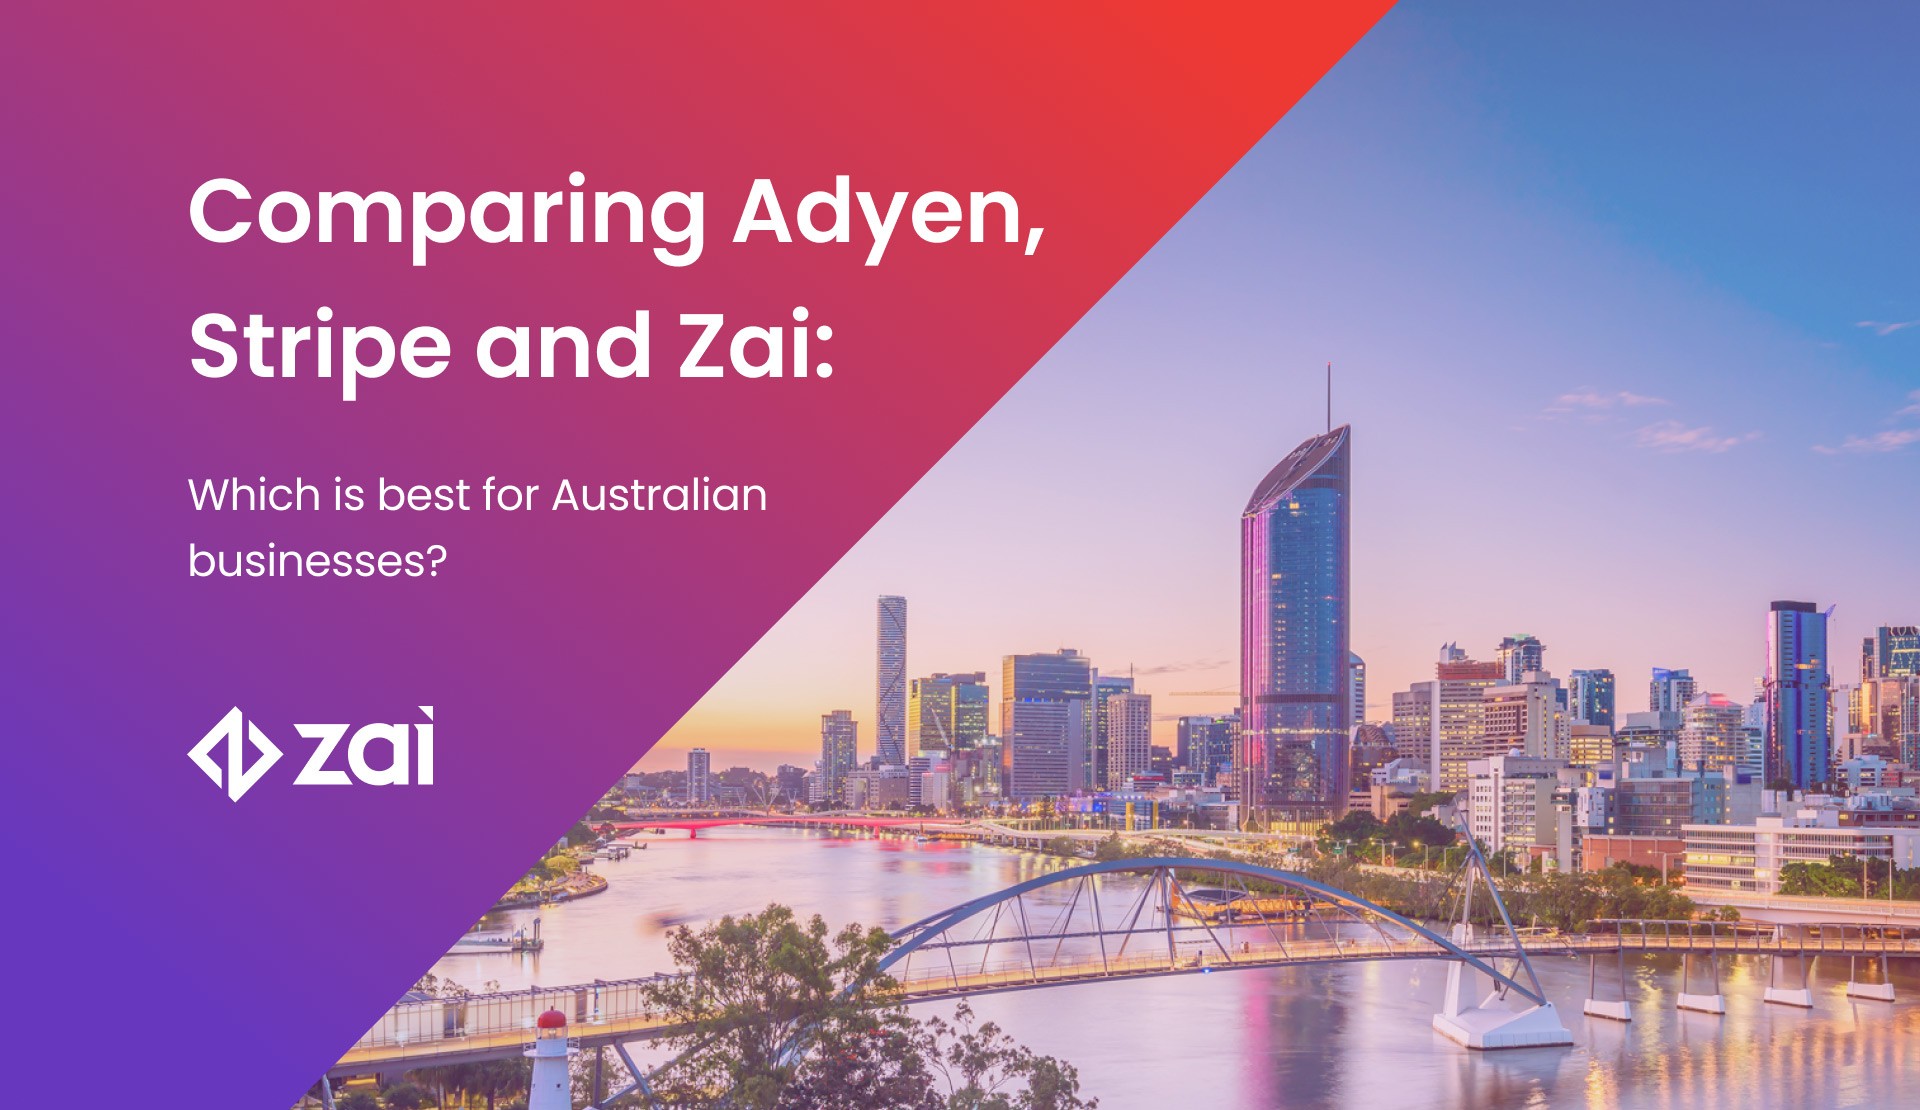 Comparing Adyen, Stripe and Zai: Which is best for Australian businesses?